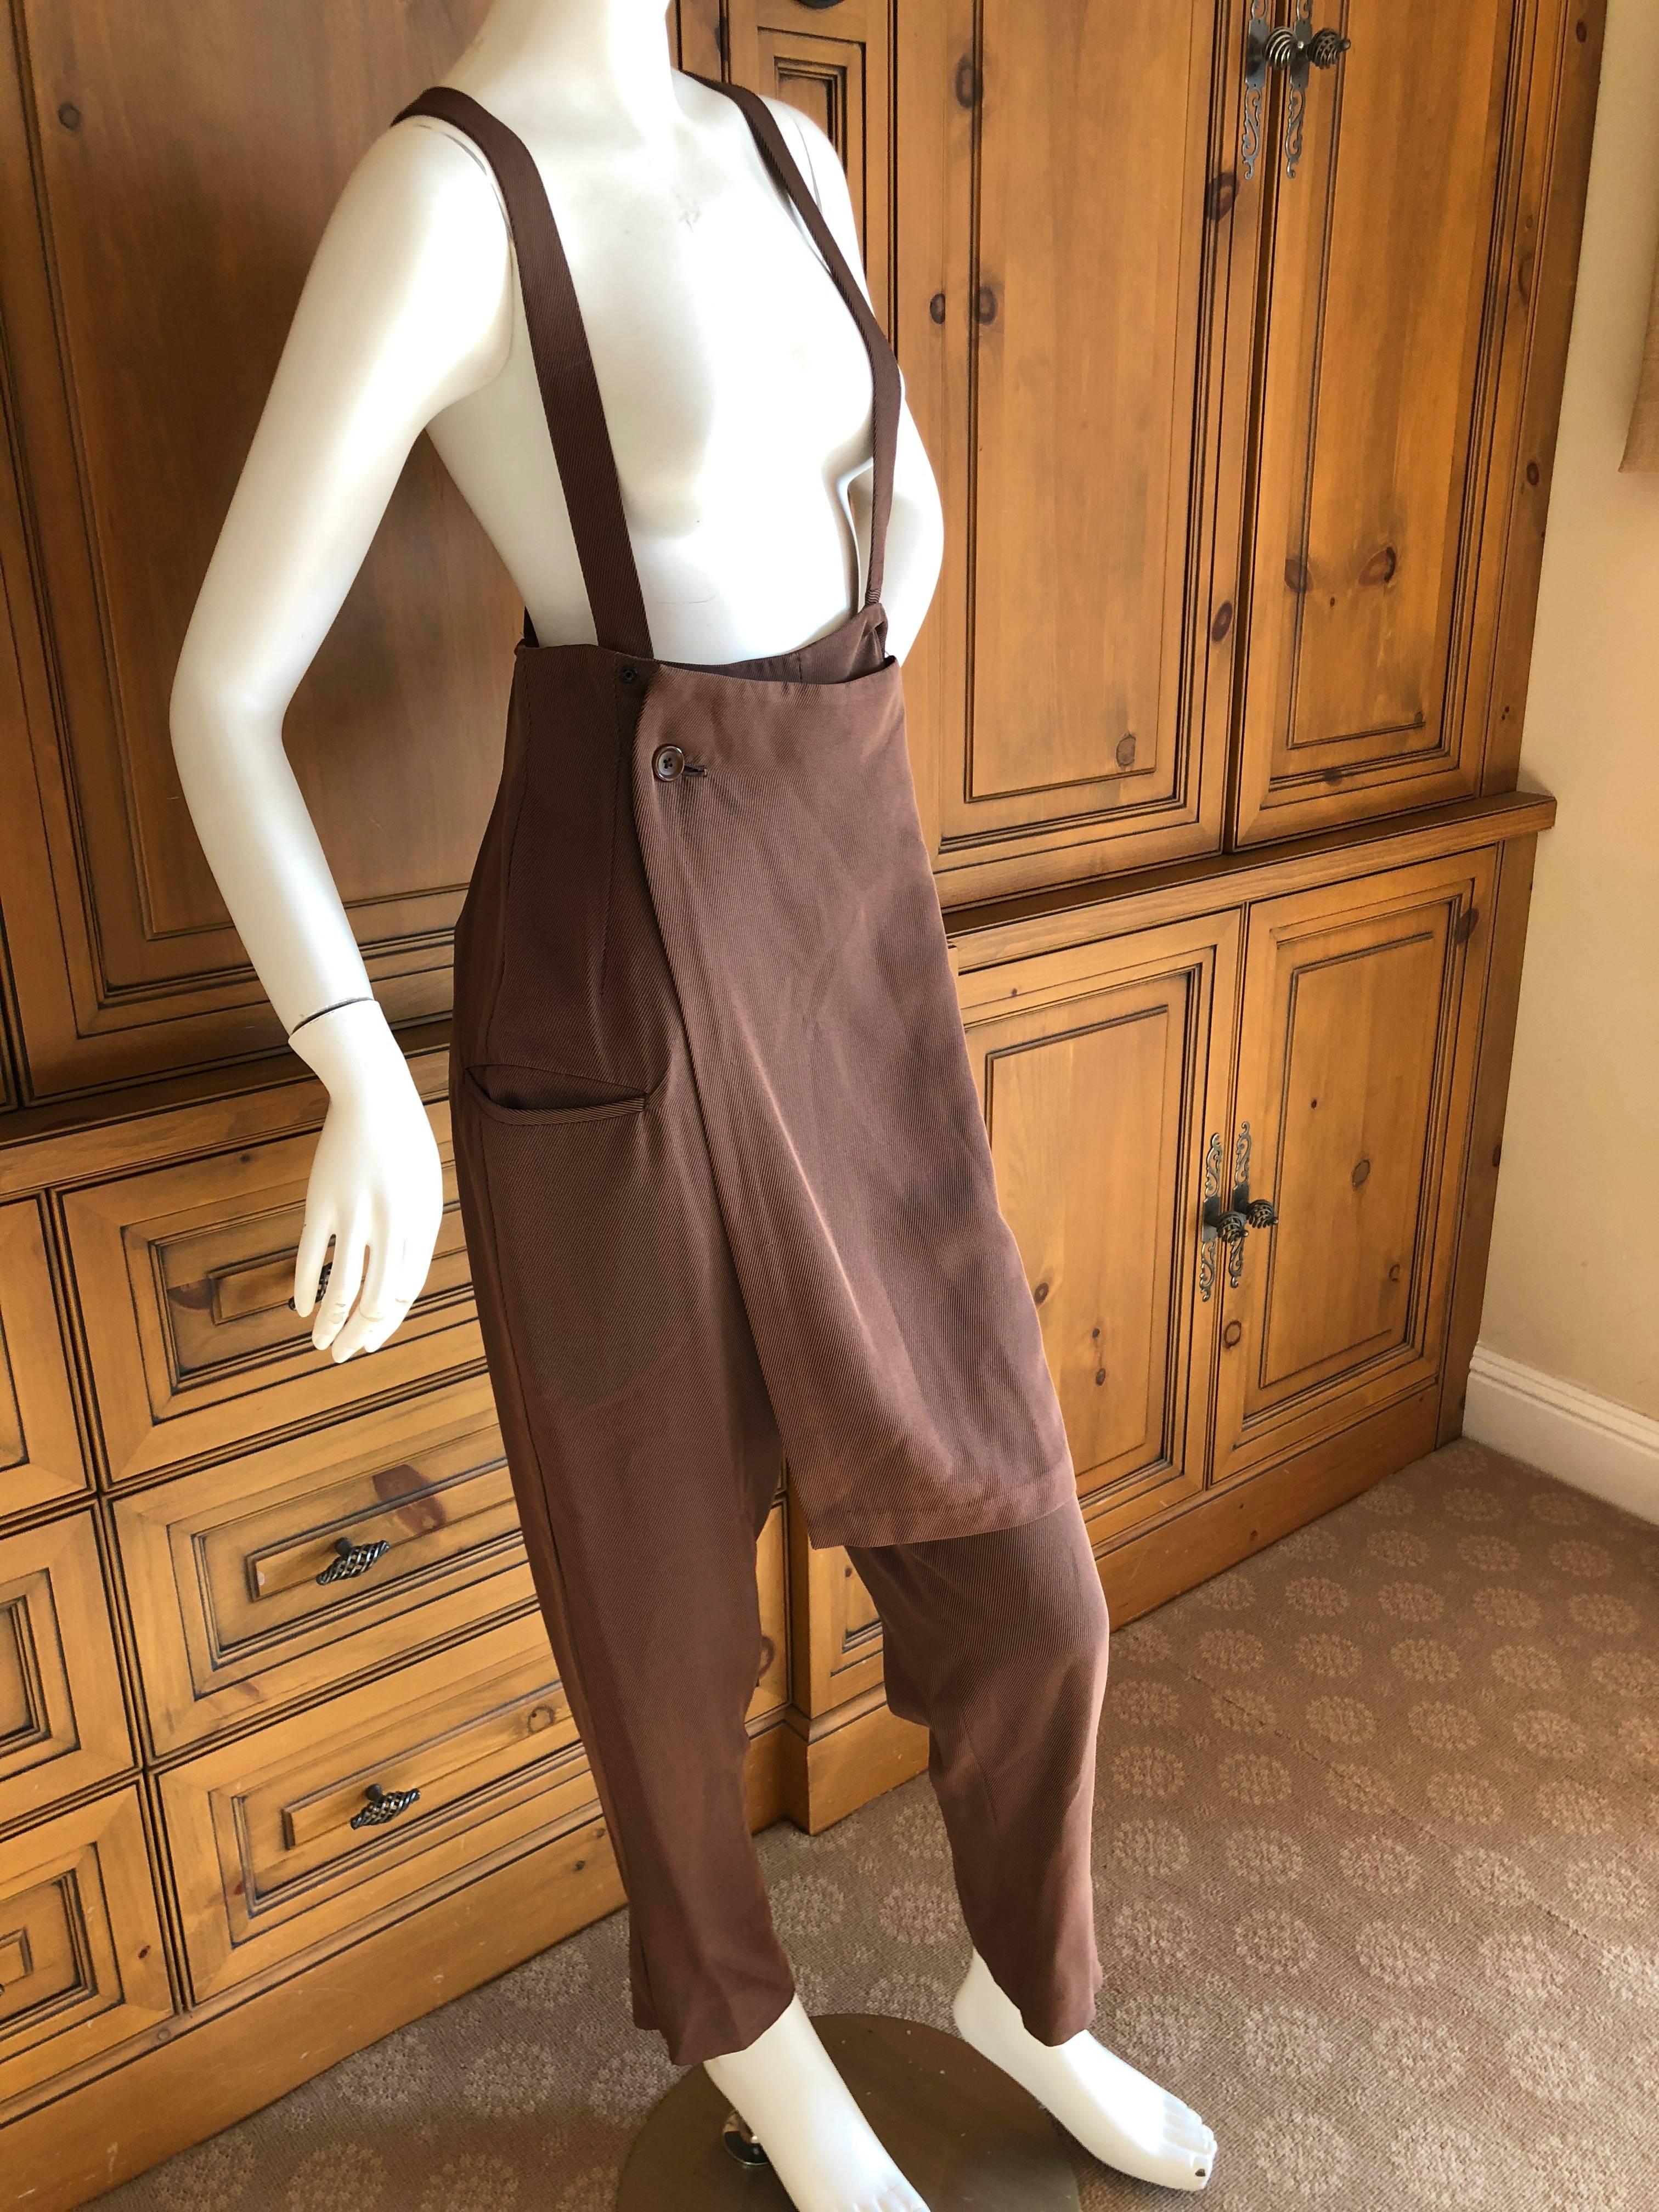 Yohji Yamamoto 1980's Pant Skirt Overalls In Excellent Condition For Sale In Cloverdale, CA